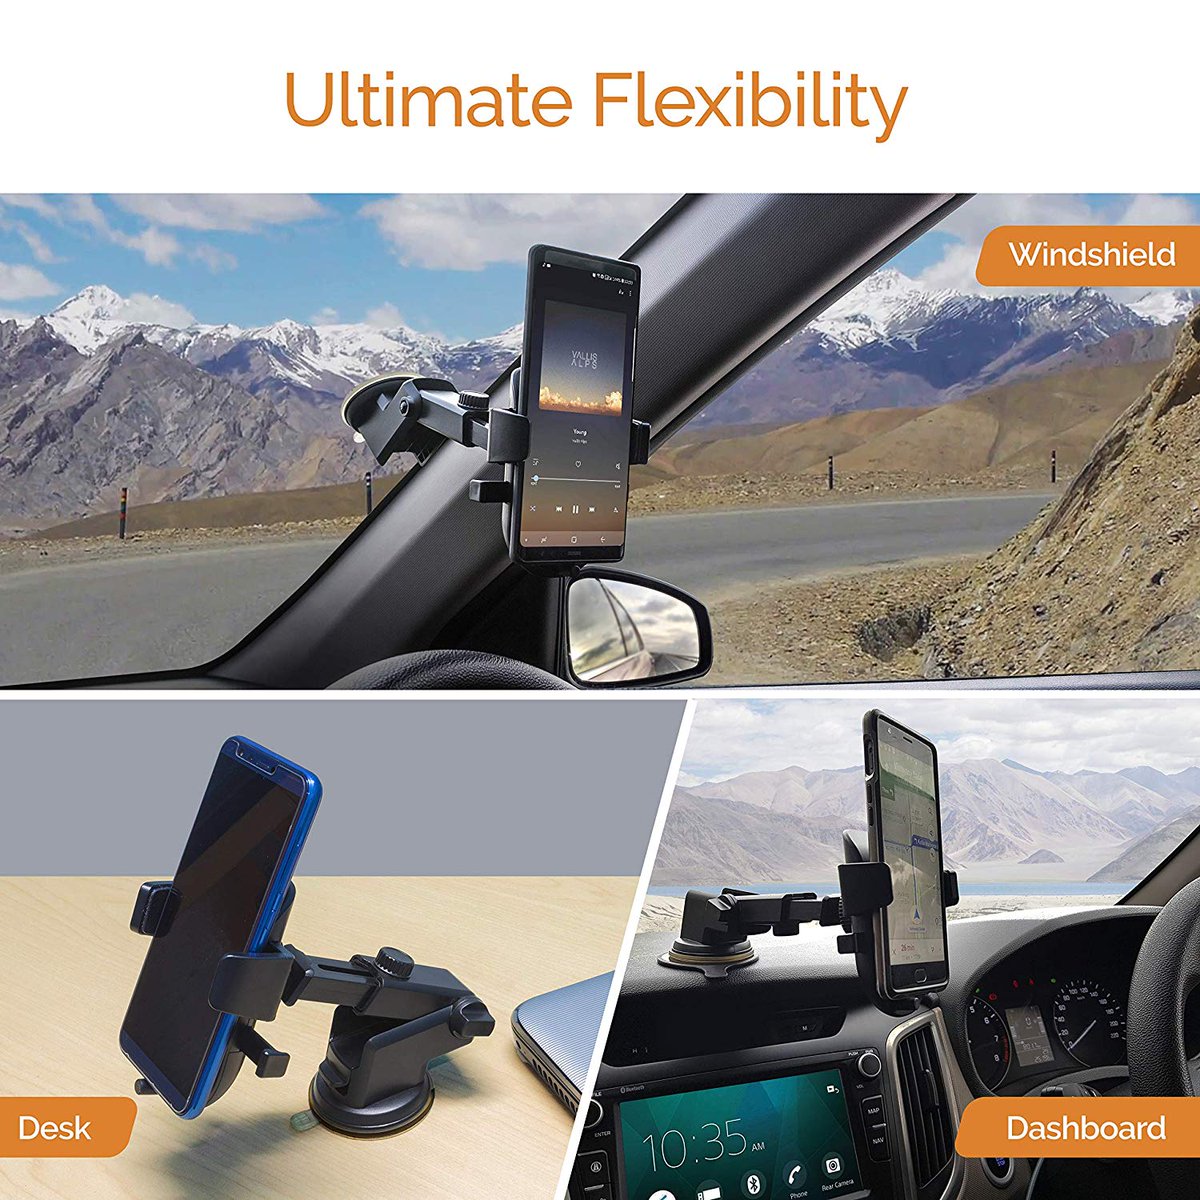 One Touch Dashboard & Windshield Car Mount for All Mobile Phones

Buy Now:- amzn.to/2QYN65j

#mobile #smartphones #gadgets #smartphonegadget